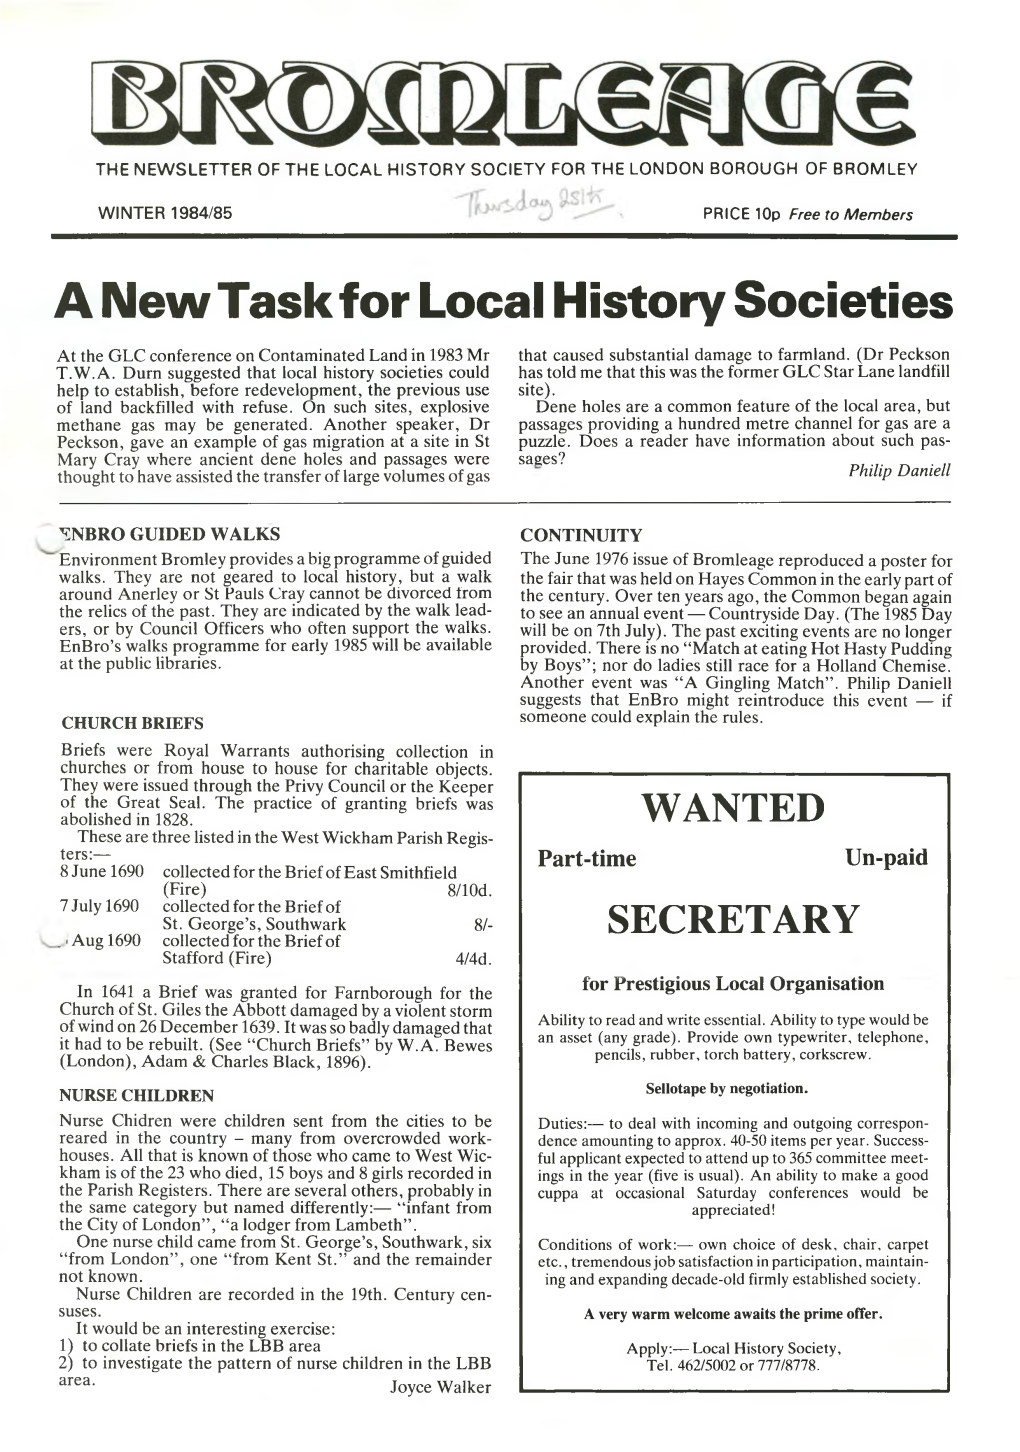 A New Task for Local History Societies WANTED SECRETARY